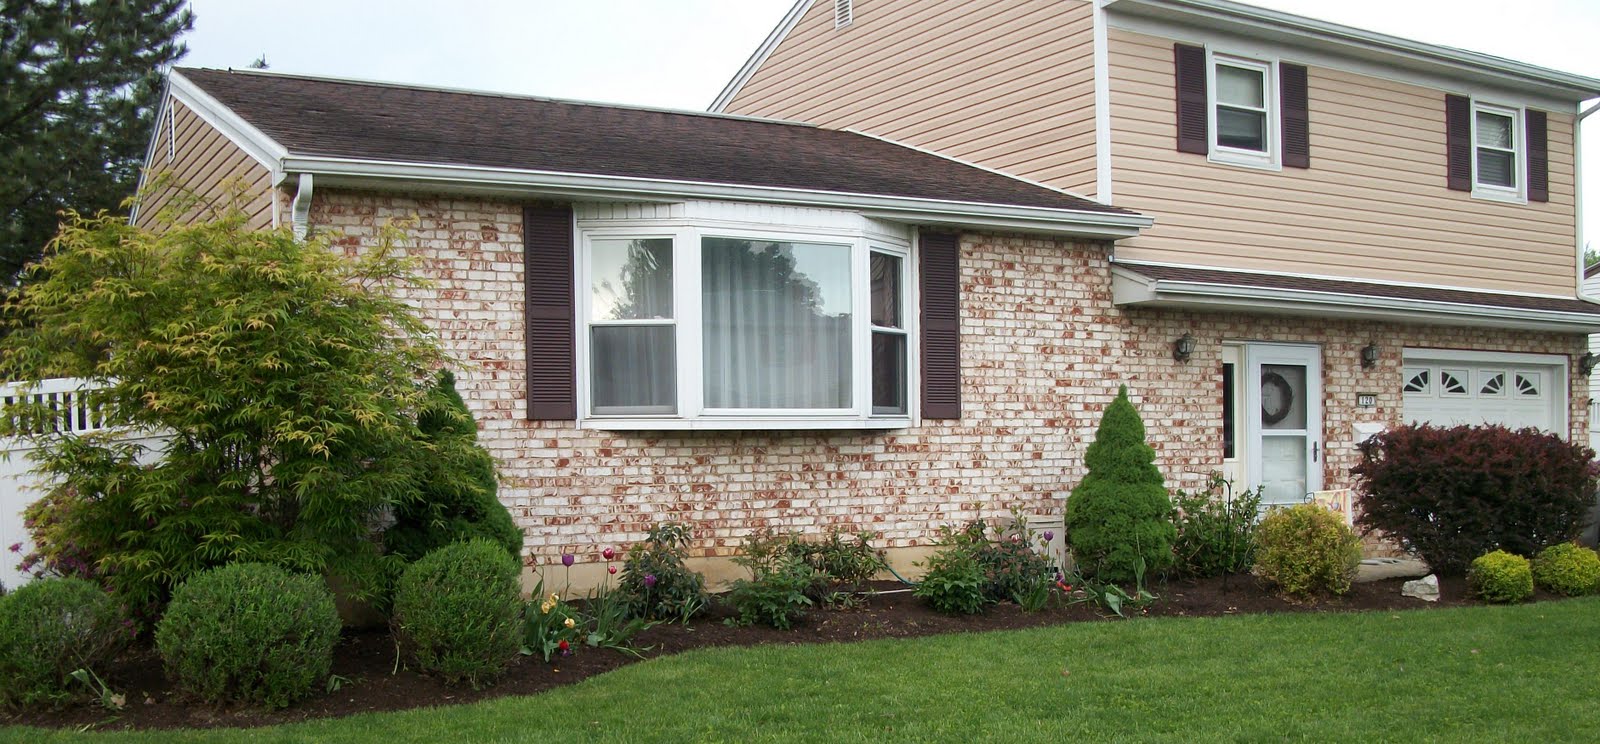 Landscaping: Landscaping Ideas Front Yard Bay Window